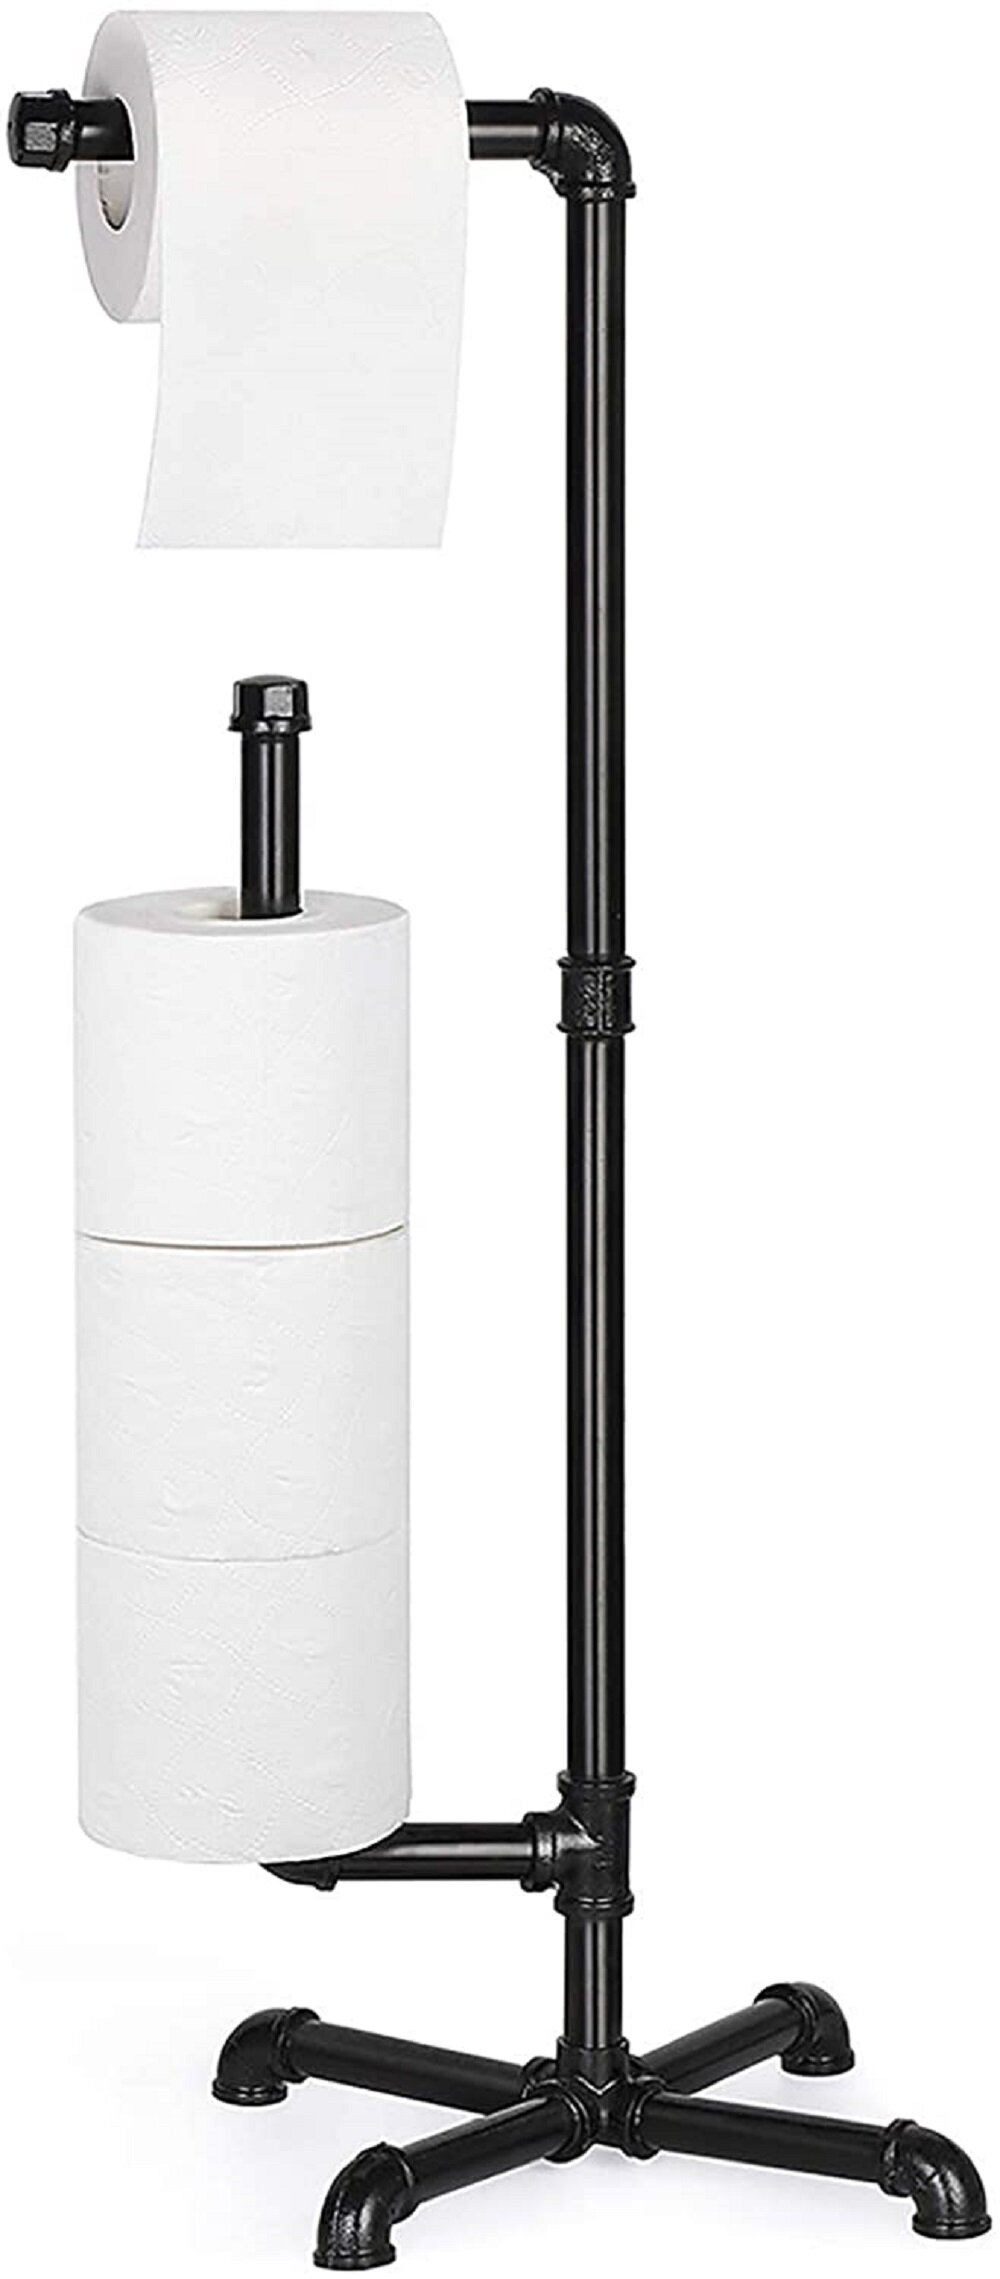 Wayfair  Way Day: Free Standing Toilet Paper Holders You'll Love